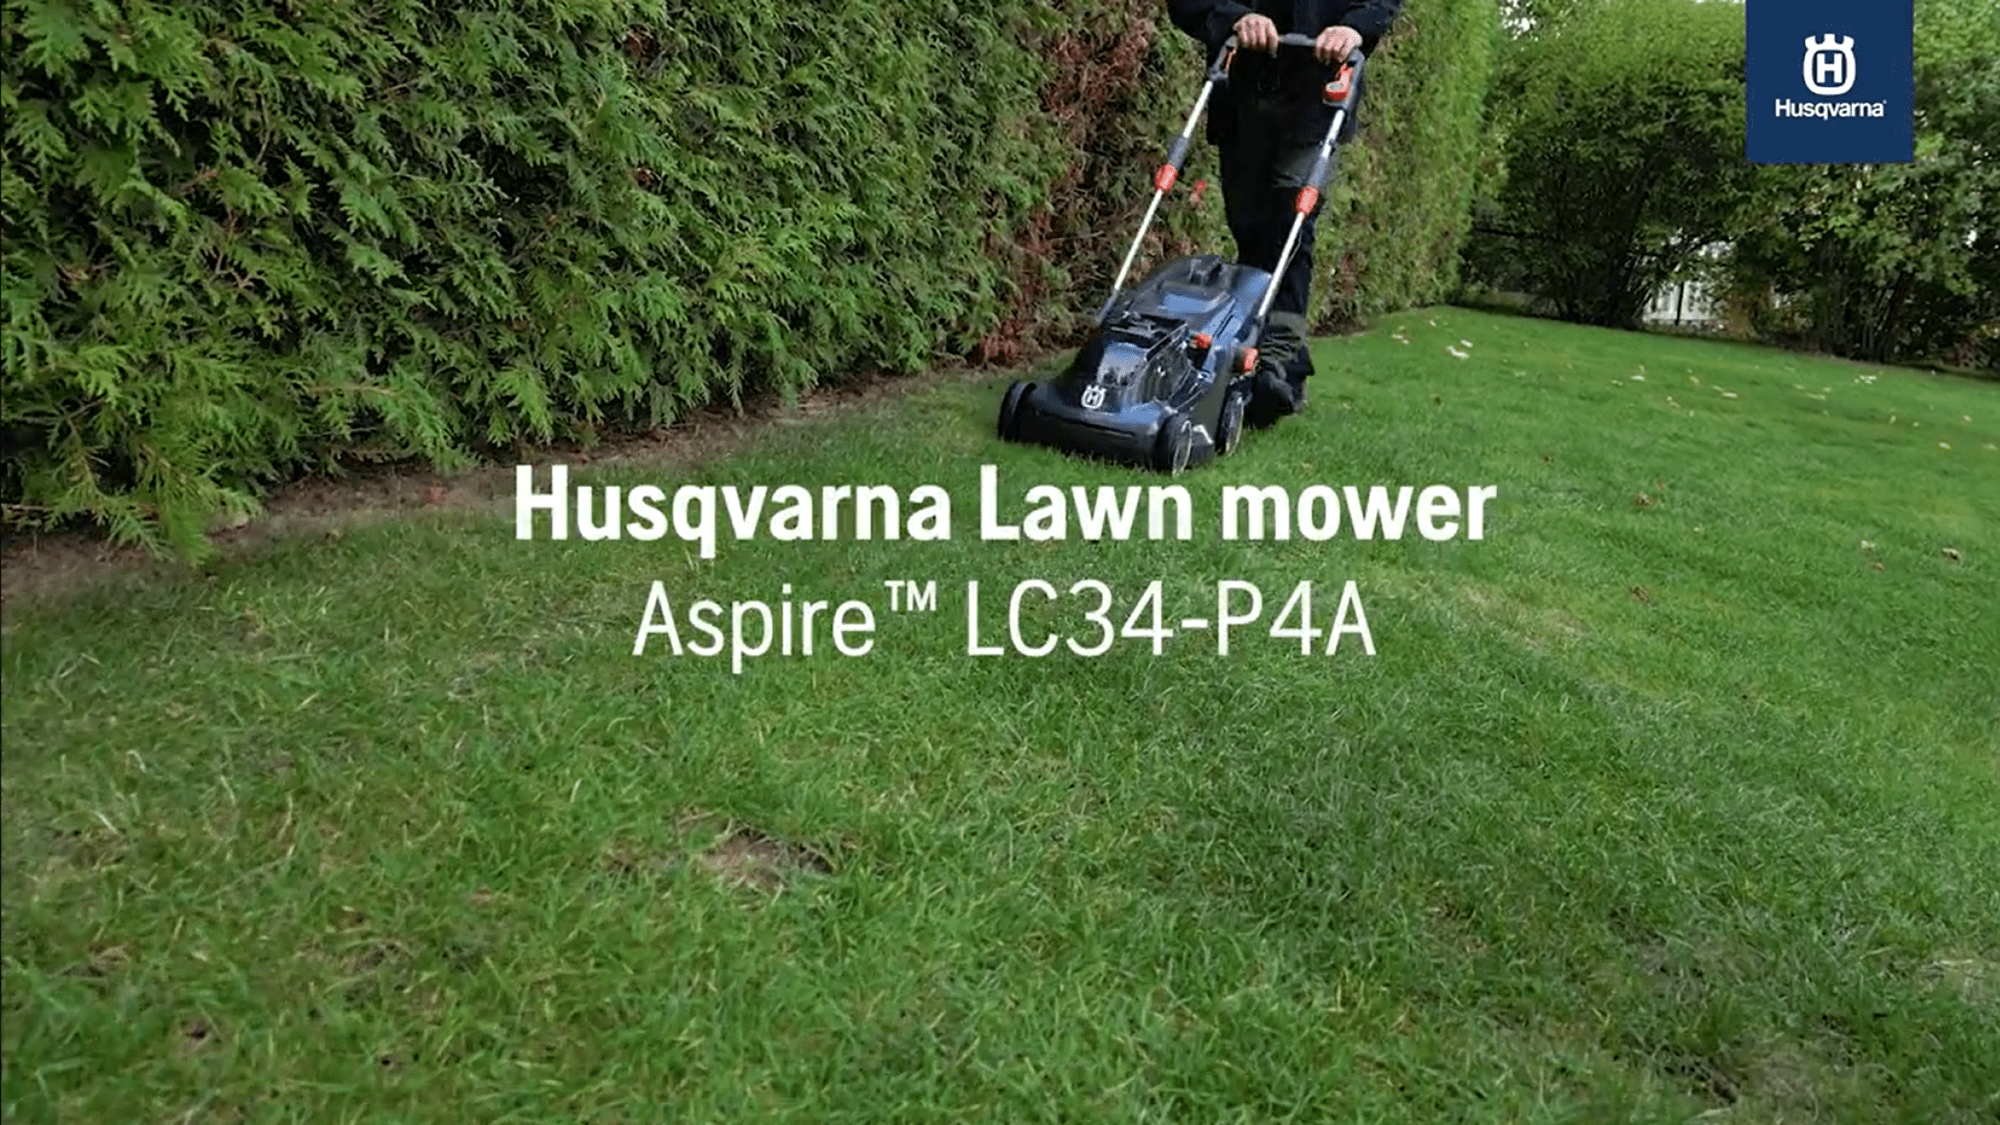 Lawn mower Aspire LC34-P4A Feature Benefit